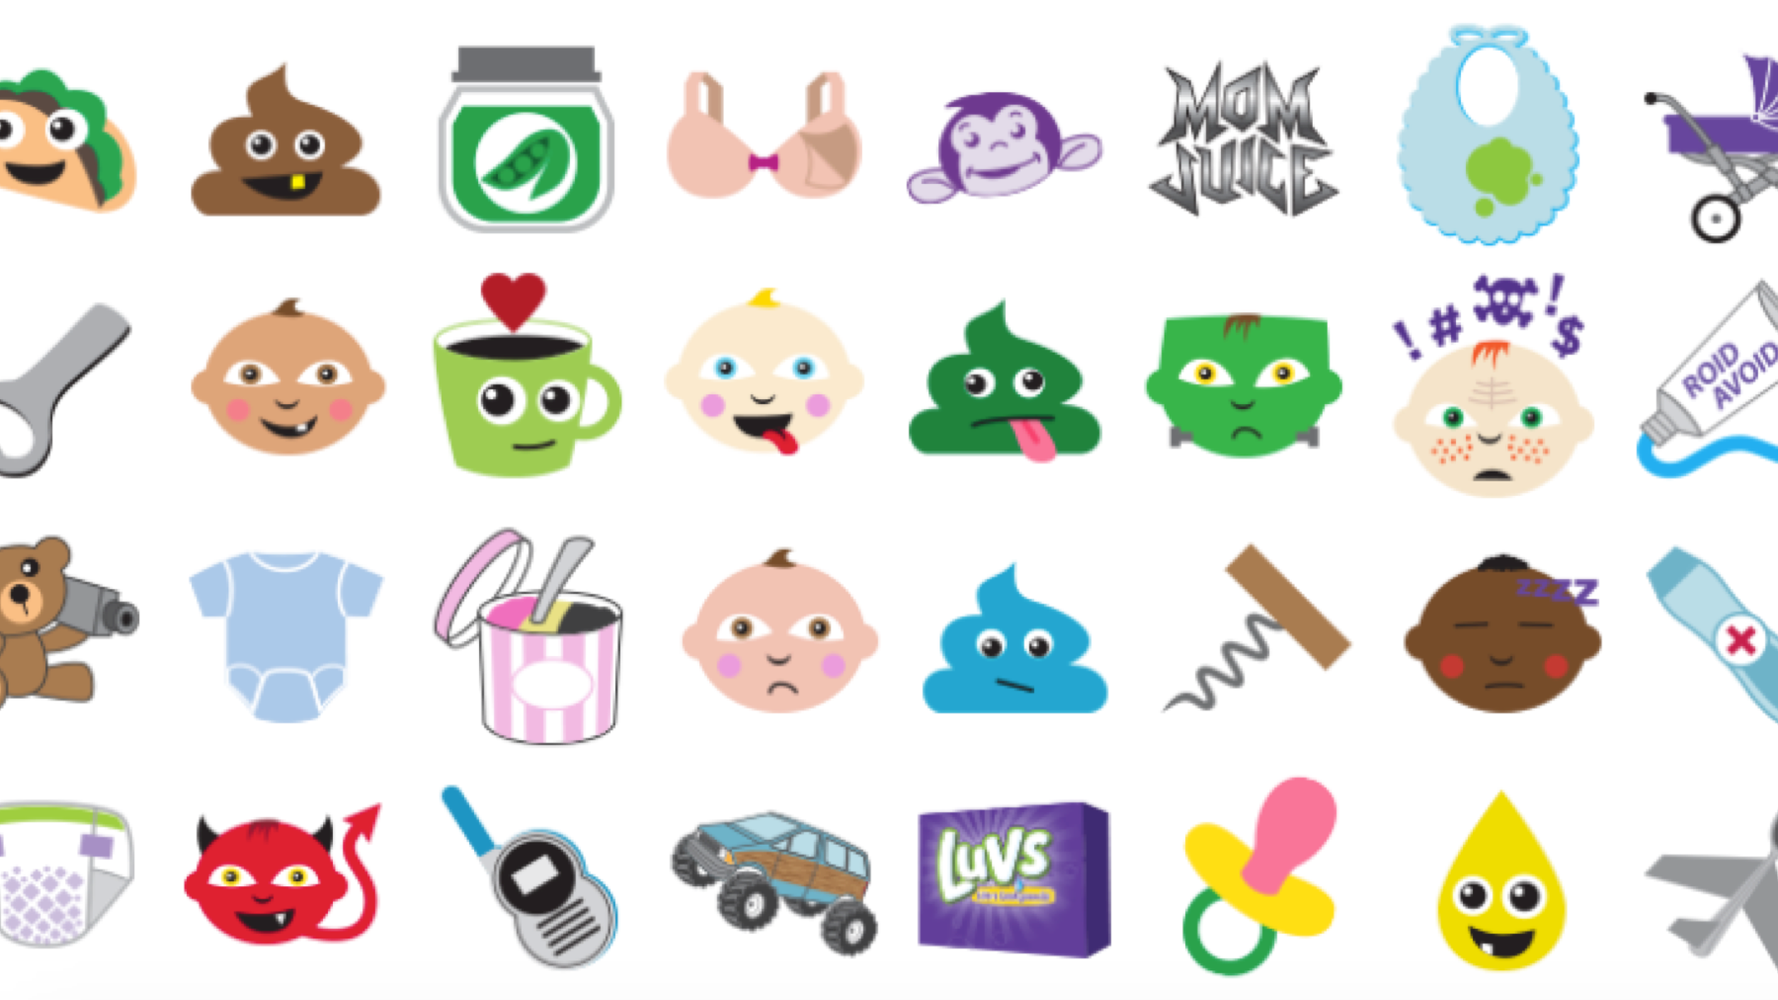 emoji - Page 4 of 21 - The Daily Dot